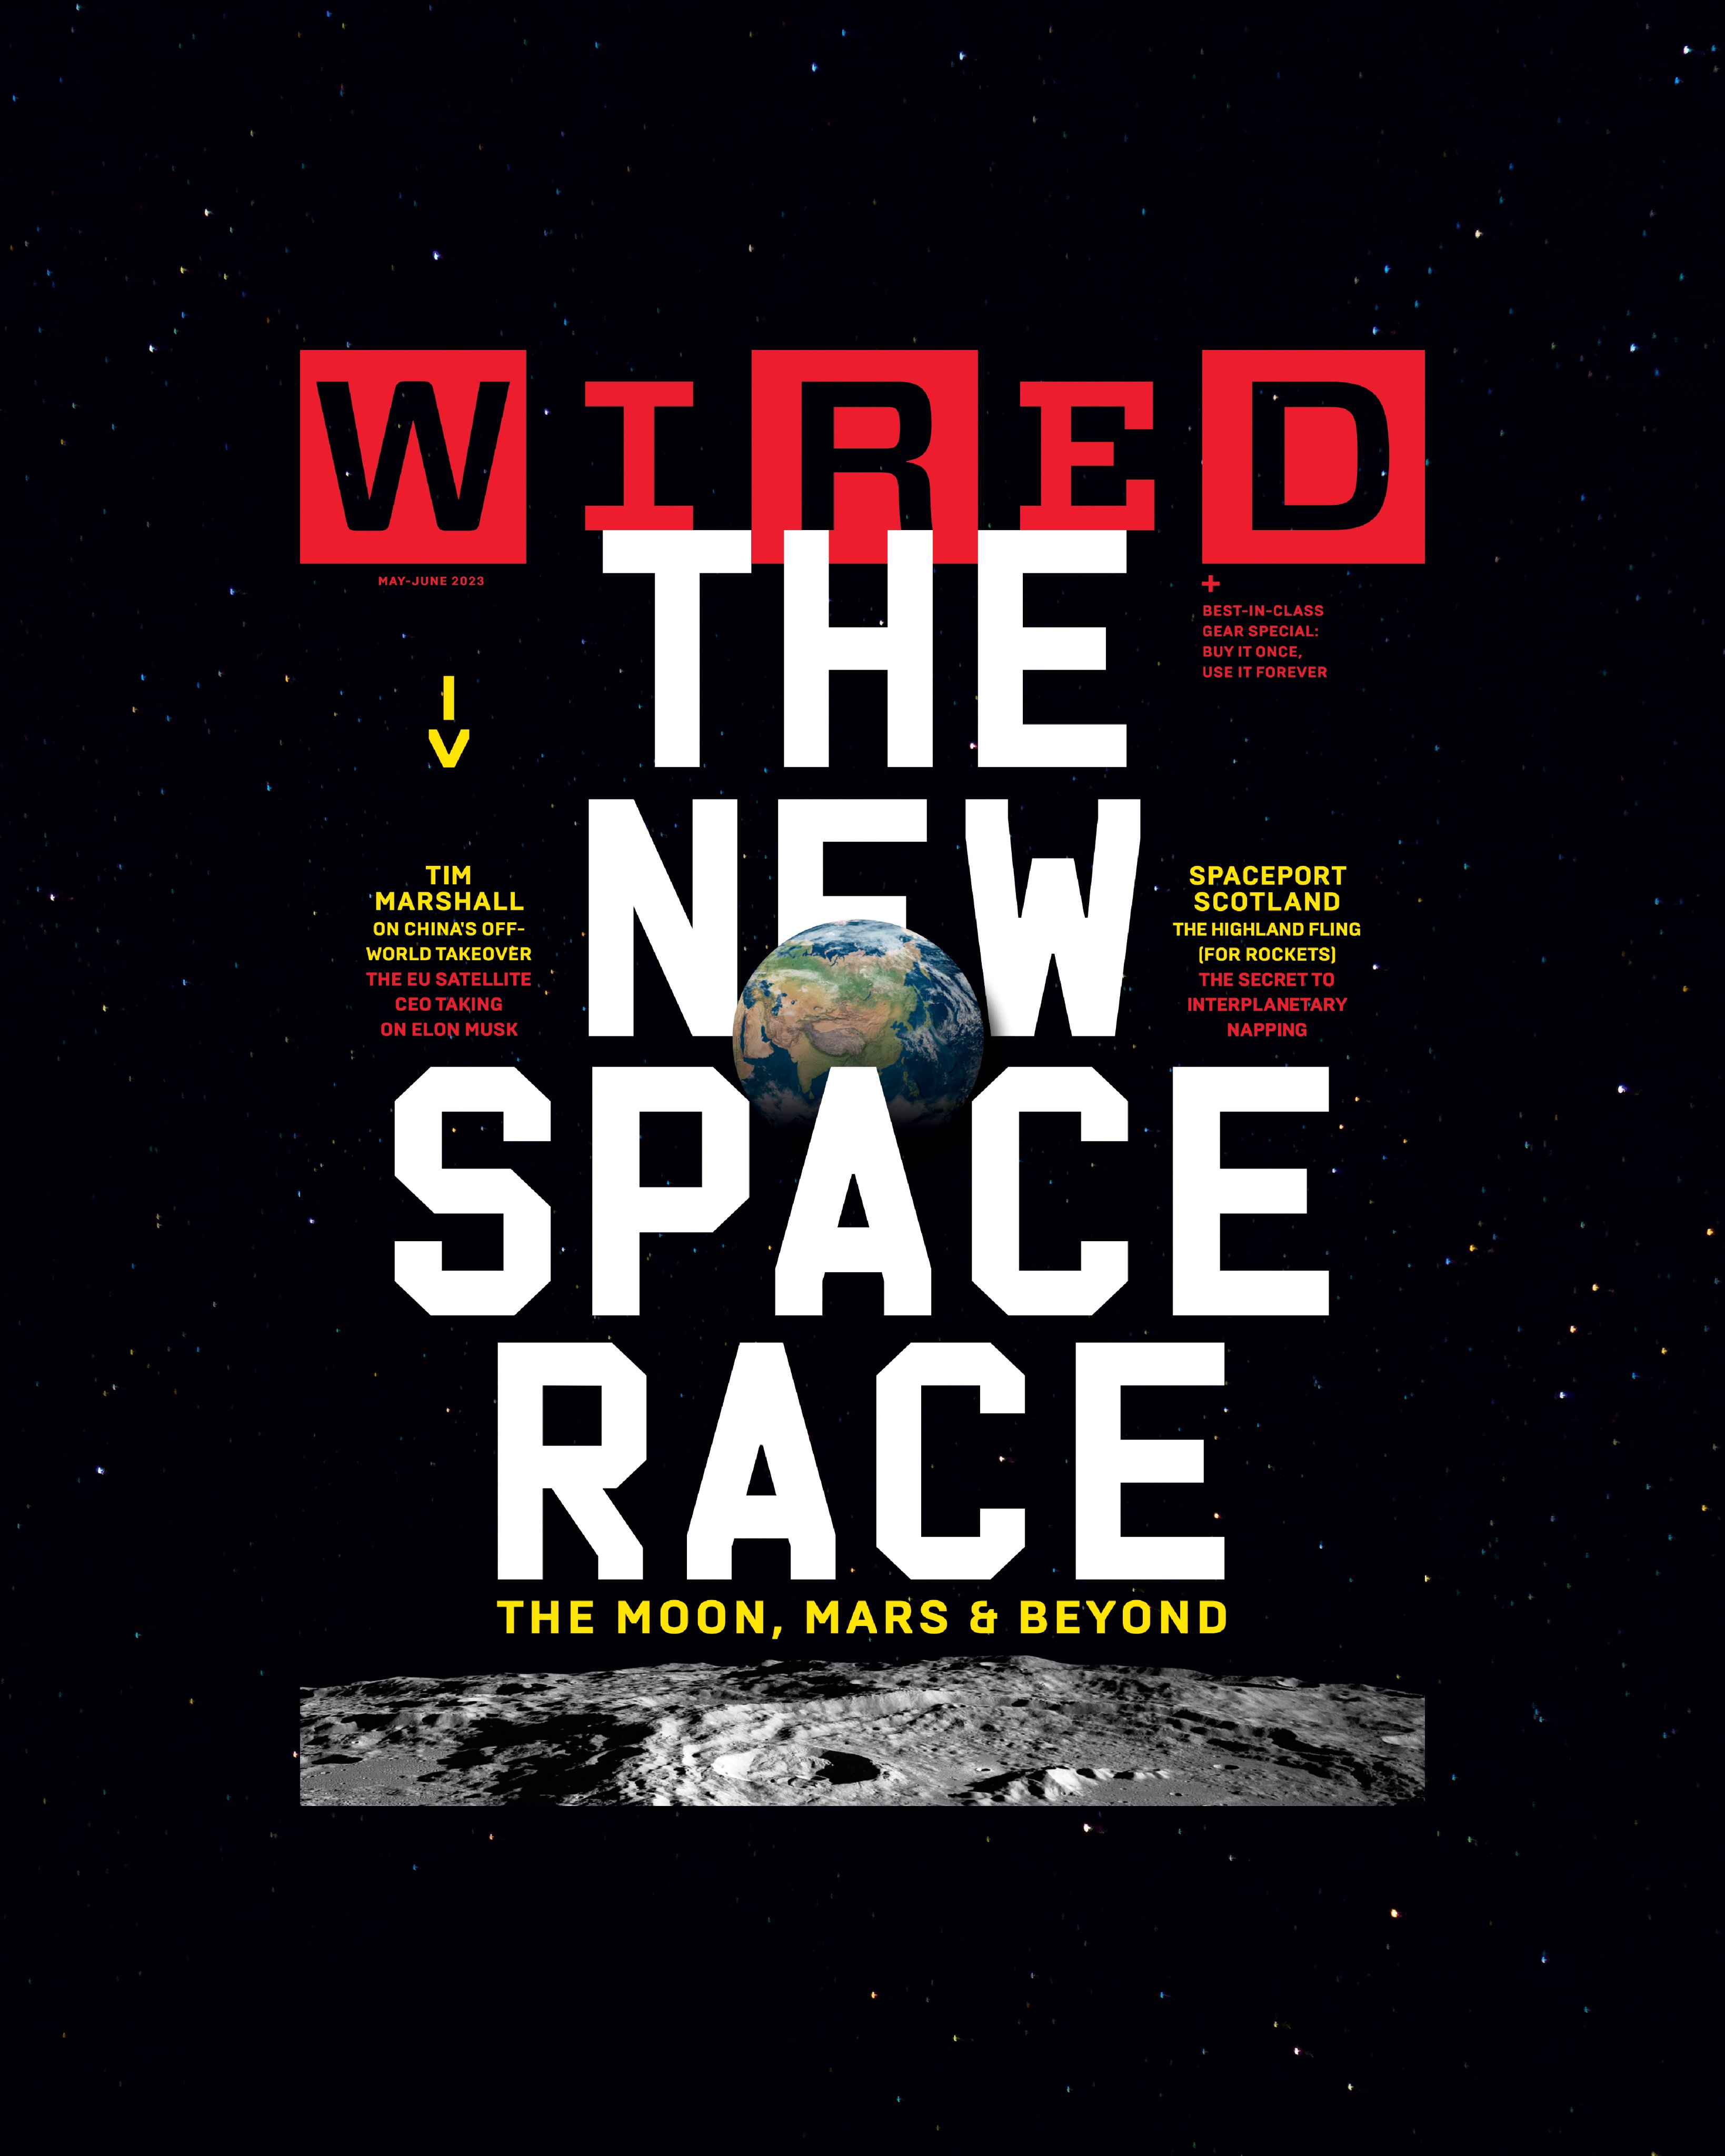 Wired the new space race : the moon, mars & beyond